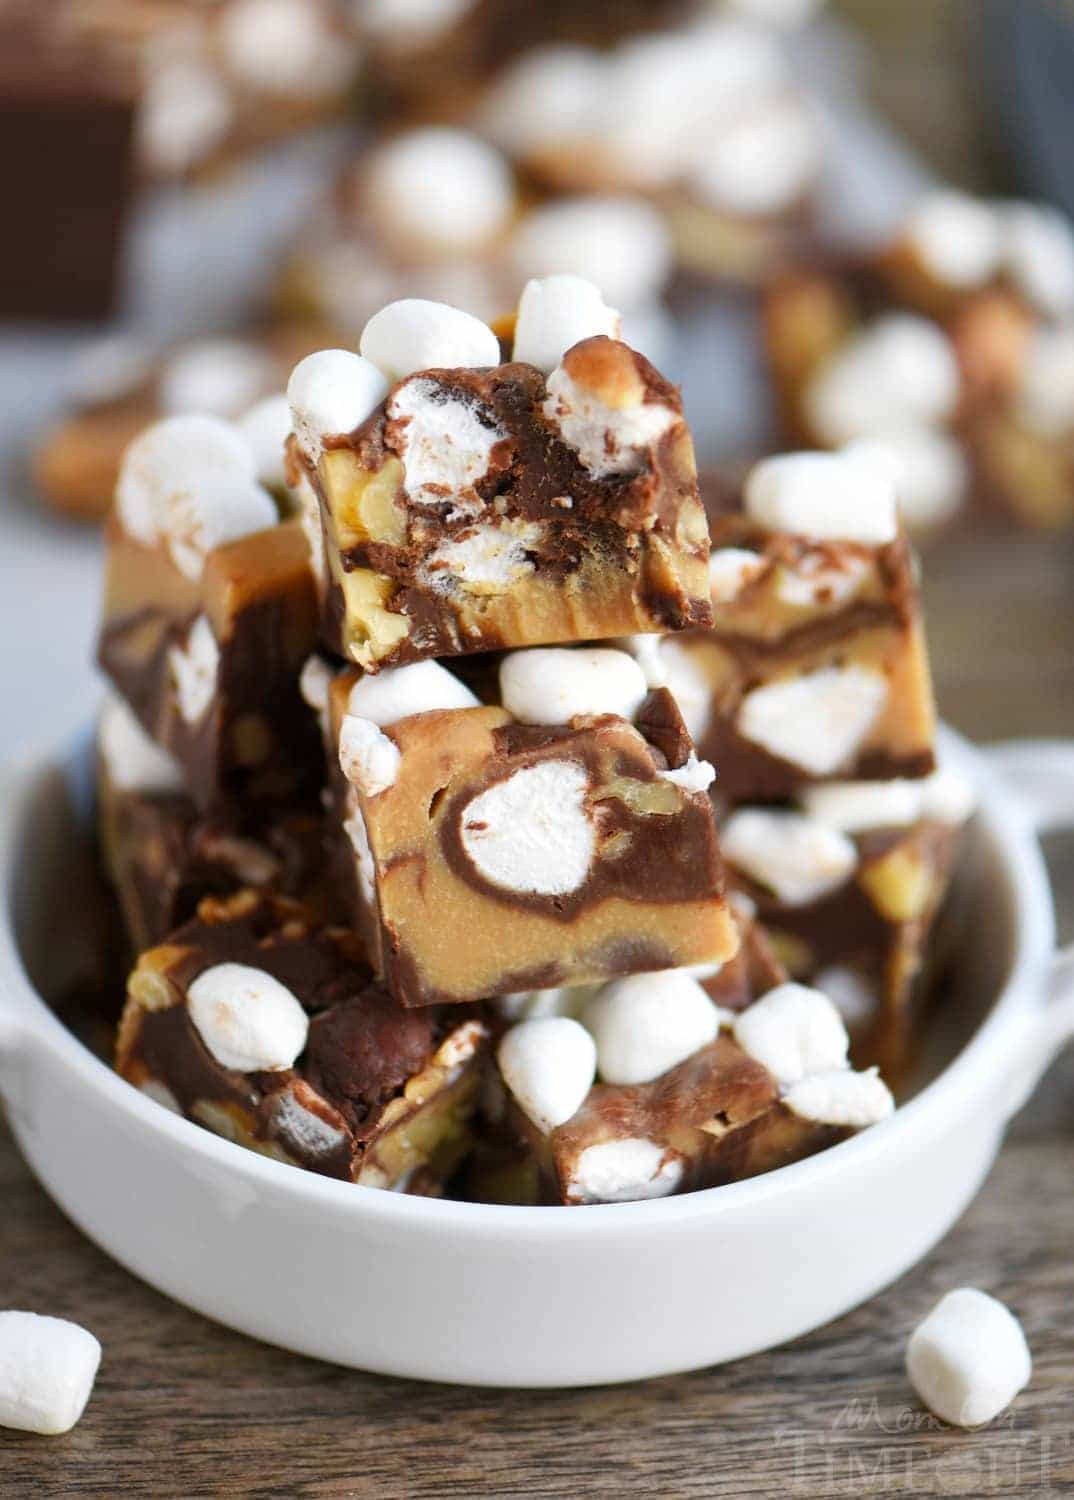 This easy, 5 Minute Peanut Butter Rocky Road Fudge is guaranteed to be a hit with the peanut butter lovers in your life! So easy to make and no candy thermometer needed! Great for the holidays and makes a lovely gift too! // Mom On Timeout